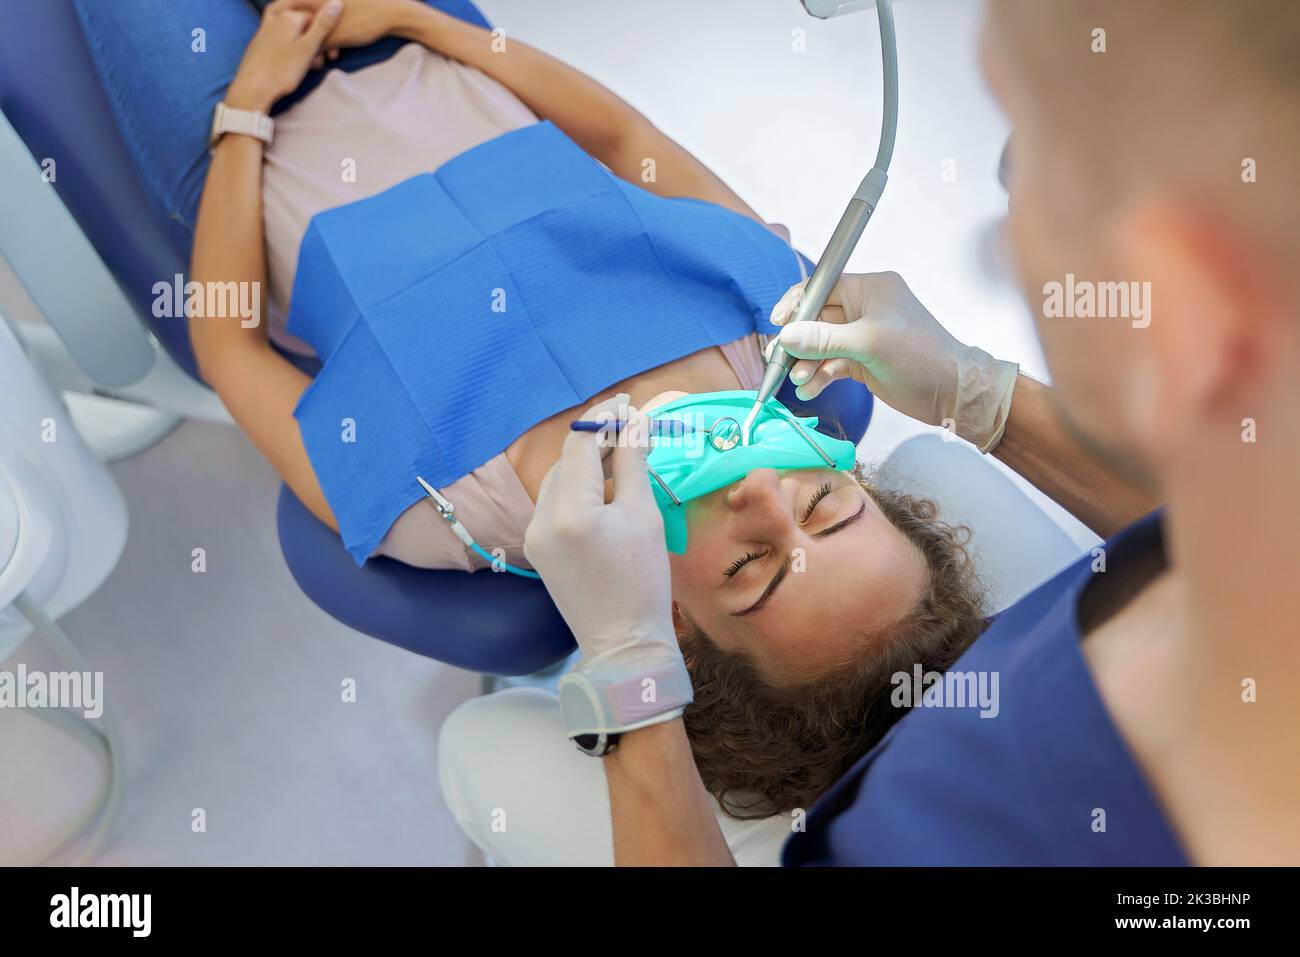 Top view of dental examination in ambulance. Stock Photo